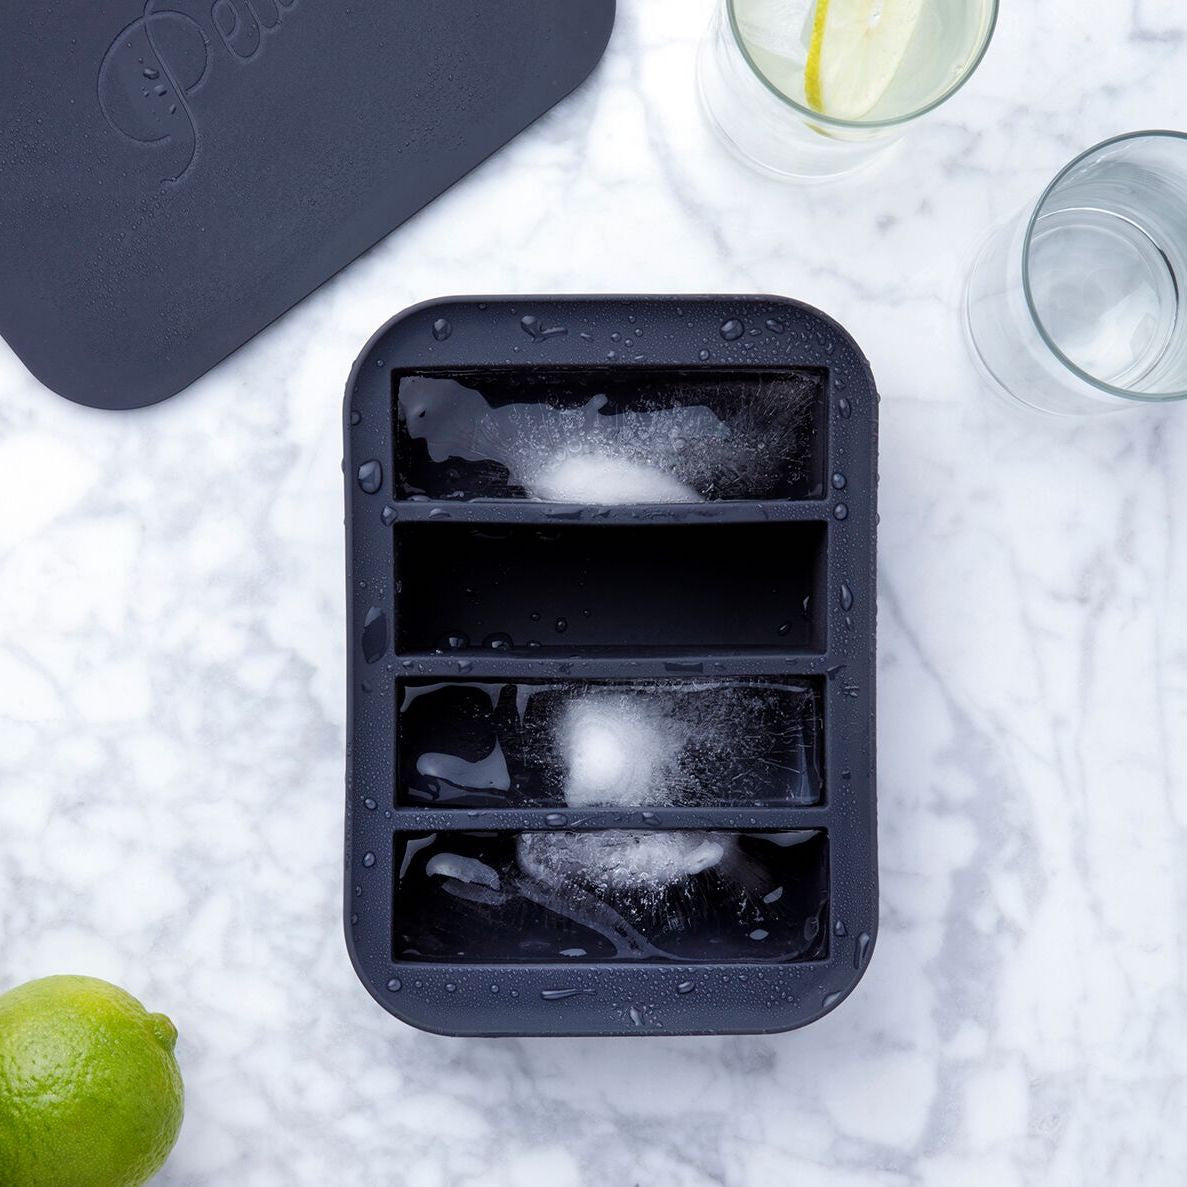 Cocktail Kingdom Collins Ice Mold Review